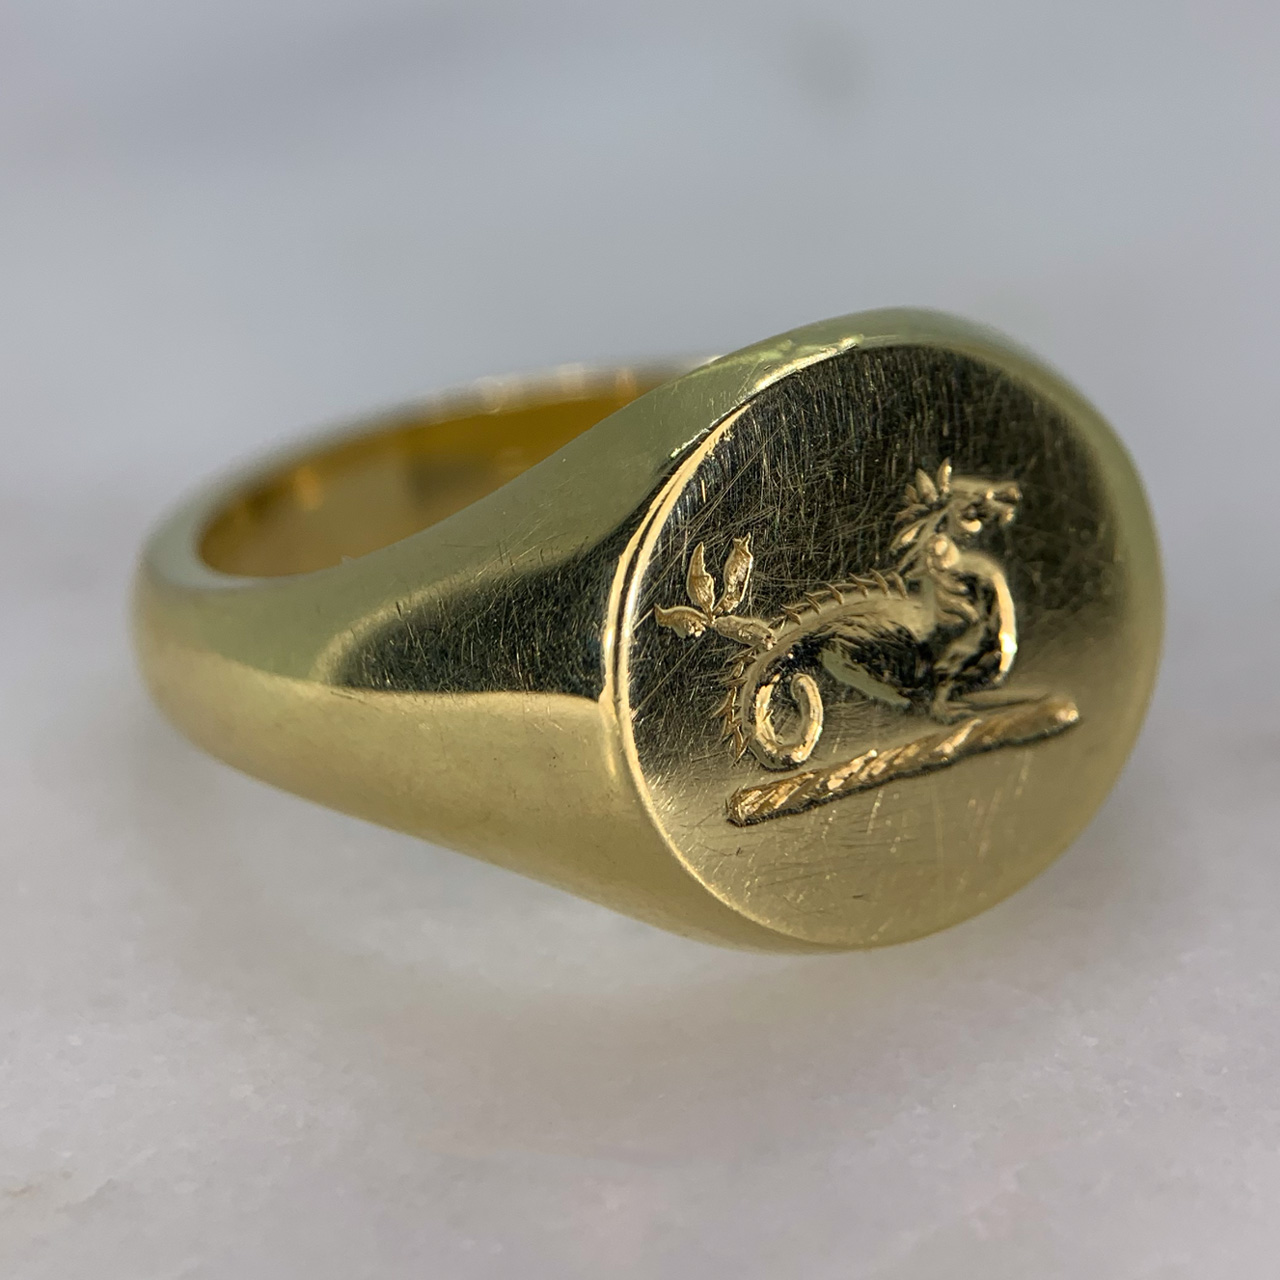 Fabulous Dragon Intaglio Signet Ring in marked 750 (18ct) yellow Gold. The dragon intaglio stamp measures 16.25mm x 15.42mm. The ring is in excellent condition, heavy on the hand with a polished shank.